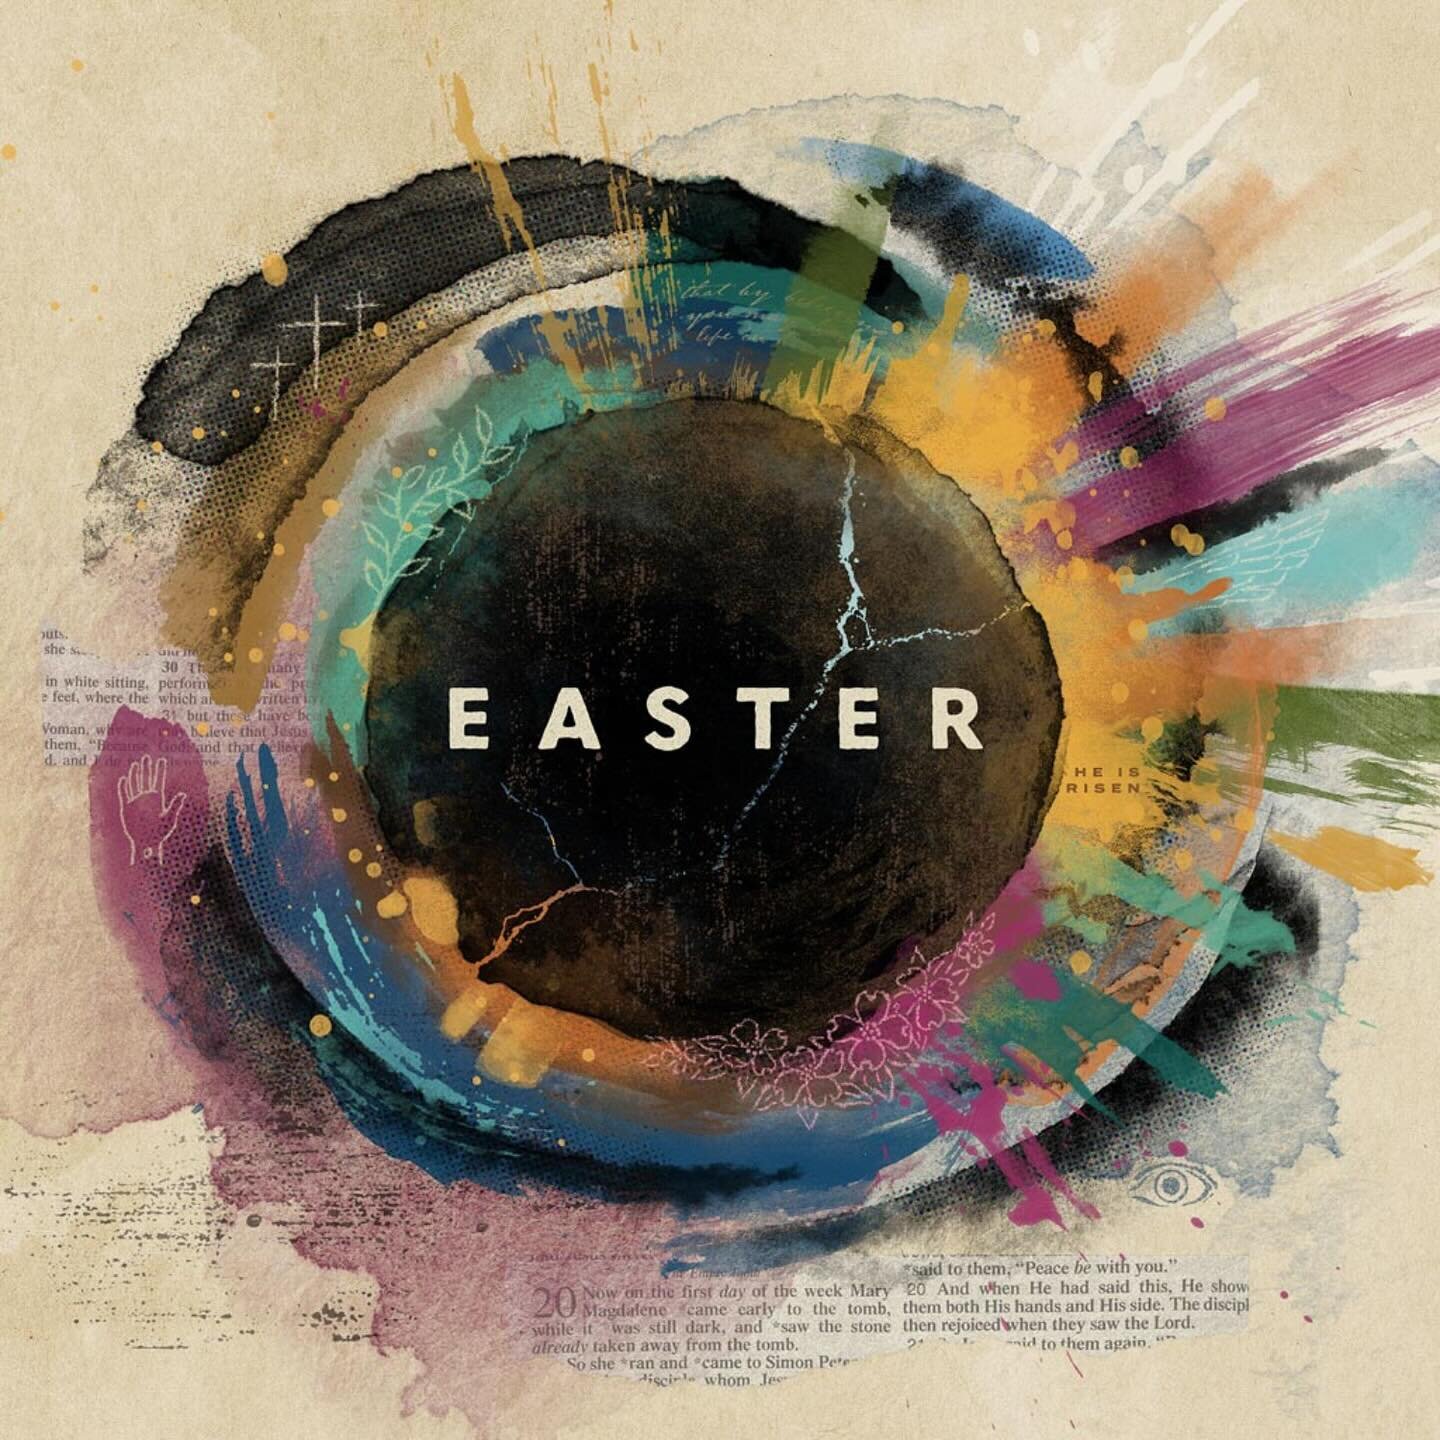 Hey Long Island! 👋 Easter is right around the corner! Celebrate at a contemporary, welcoming, and relevant church. 

This Easter, we&rsquo;re planning a practical message, powerful music, an exciting kids program, and more! We&rsquo;ll have a family